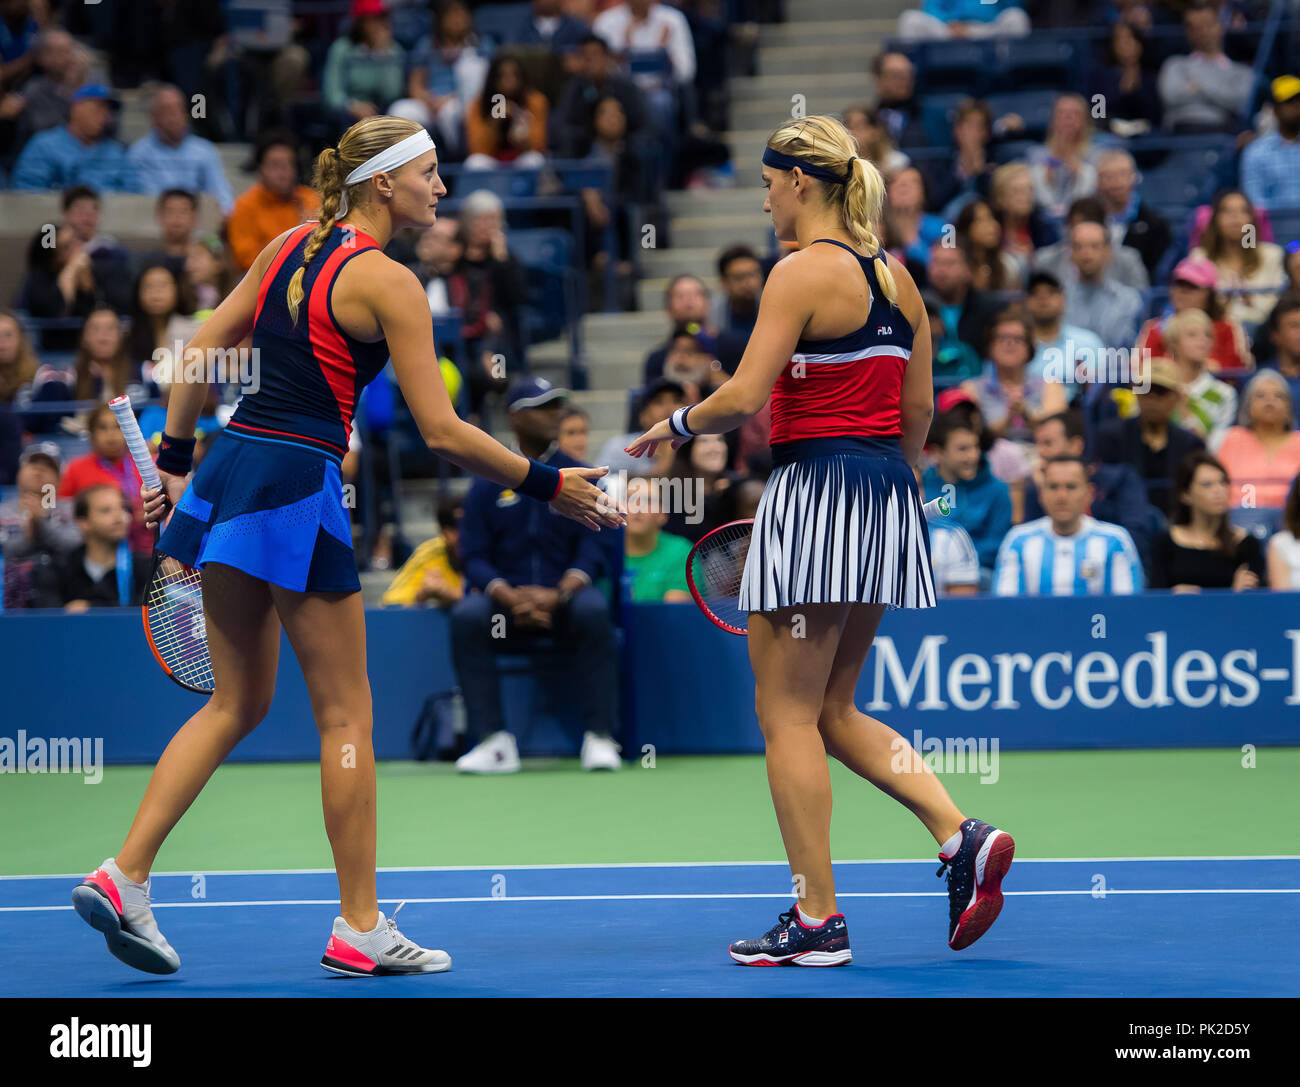 September 9, 2018 - Kristina Mladenovic of France & Timea Babos of Hungary  in action during the